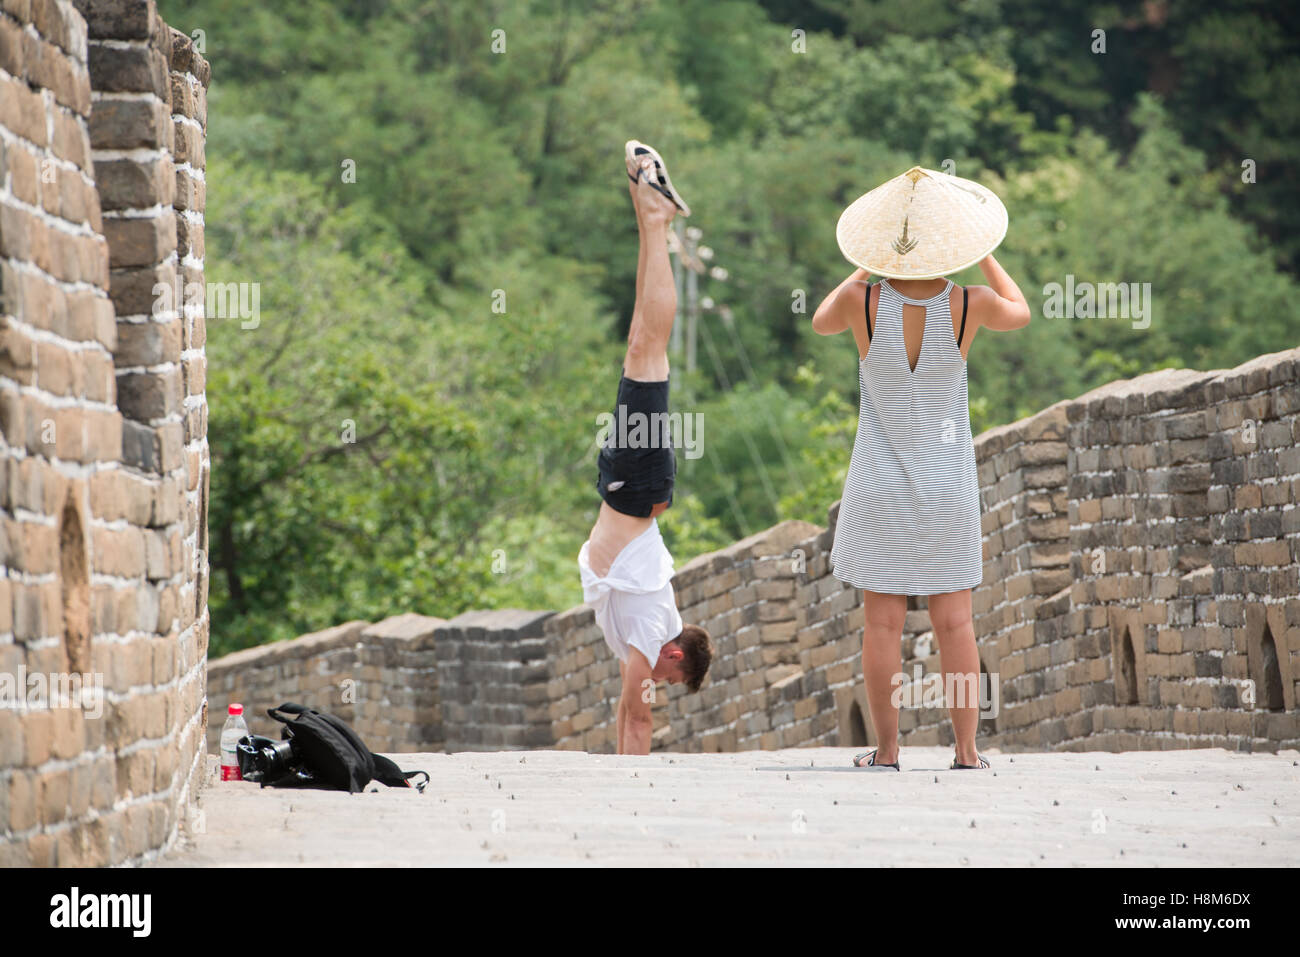 Mutianyu, China - Woman wearing an Asian conical hat taking pictures of a man doing a handstand on the Great Wall of China. The Stock Photo